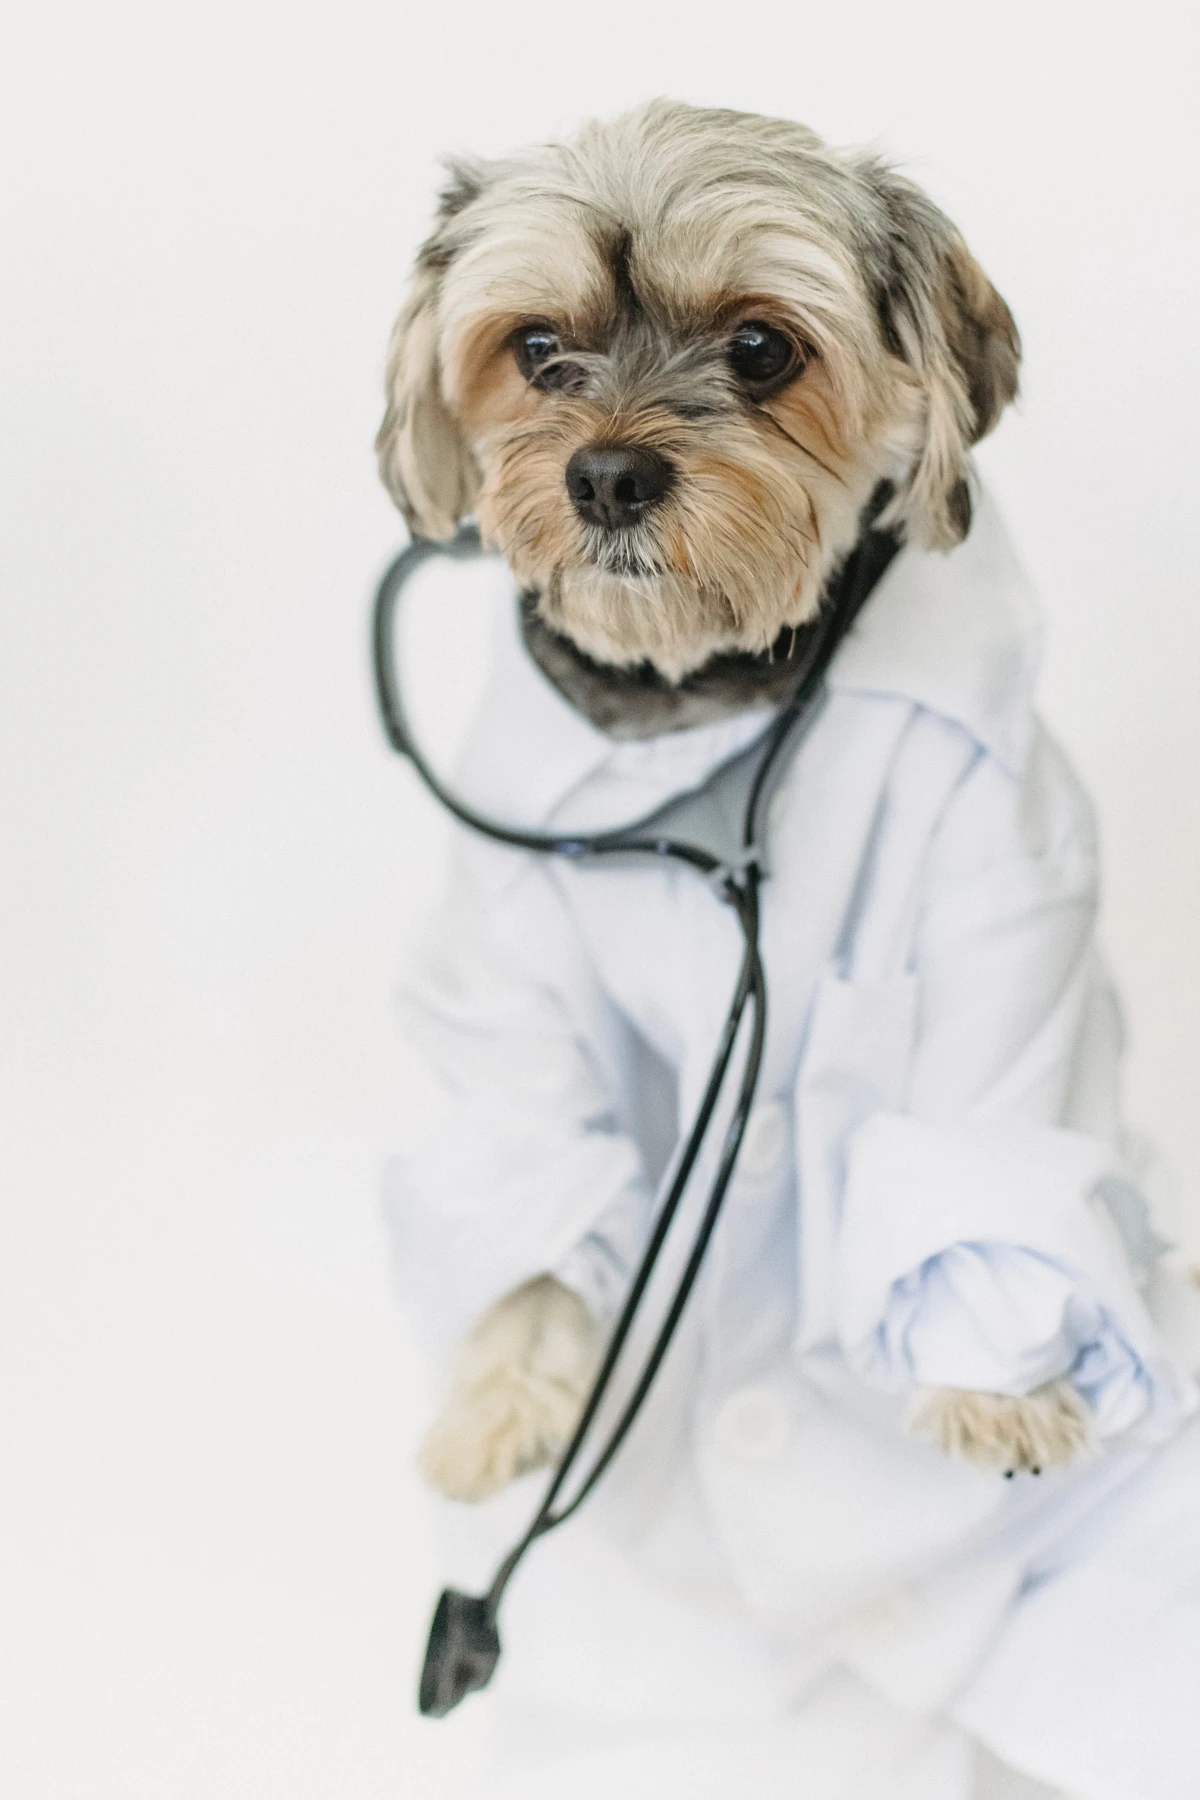 small dog dressed as a doctor